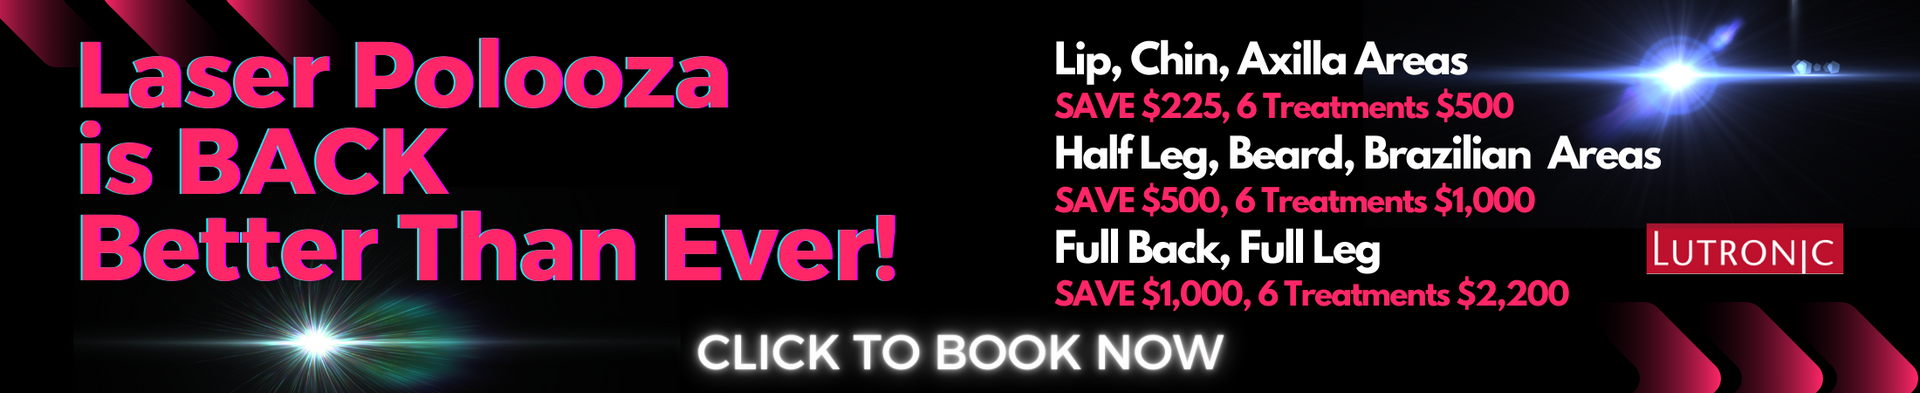 Laser hair removal sale with Lutronic laser